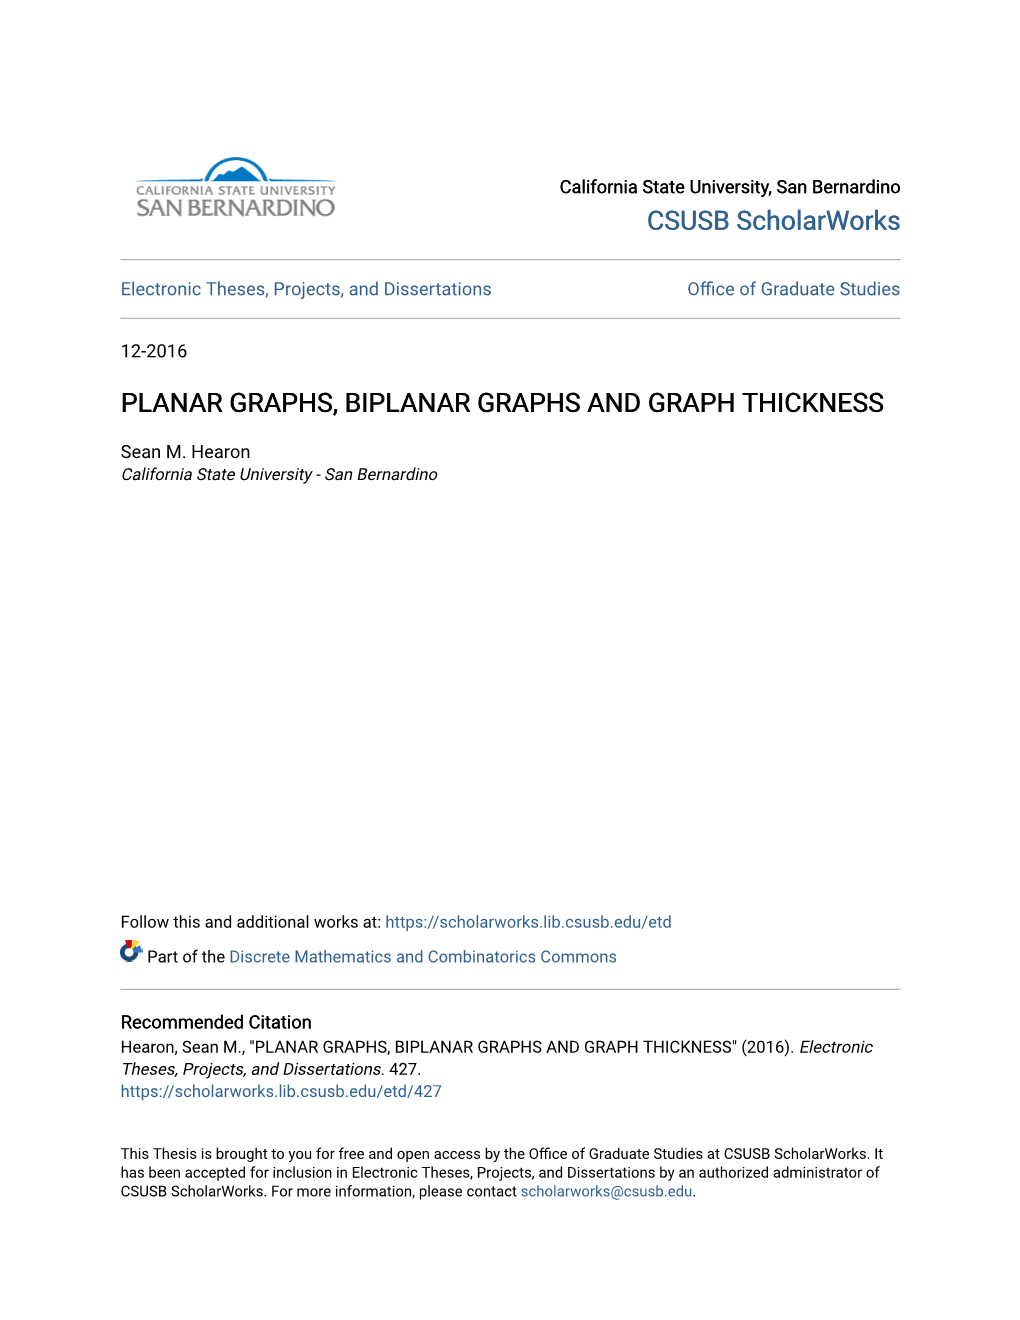 Planar Graphs, Biplanar Graphs and Graph Thickness